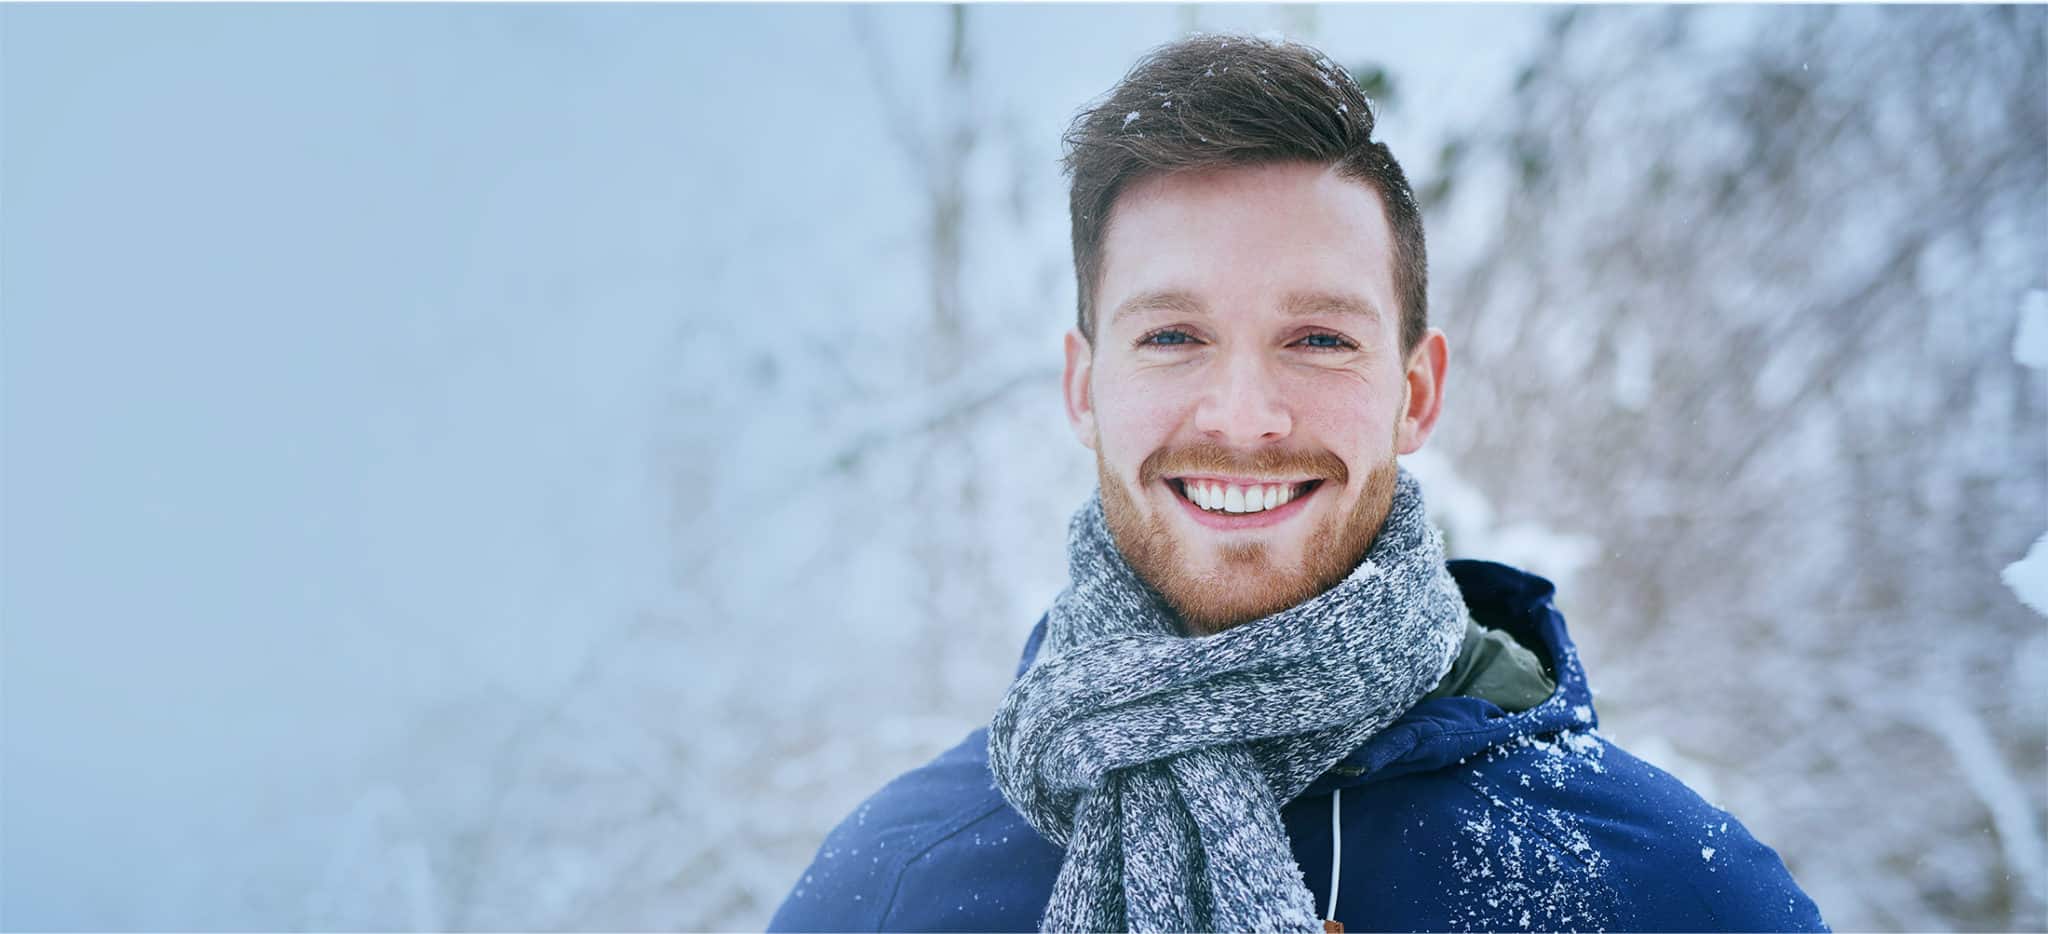 Smiling Man with a scarf in a snowfall